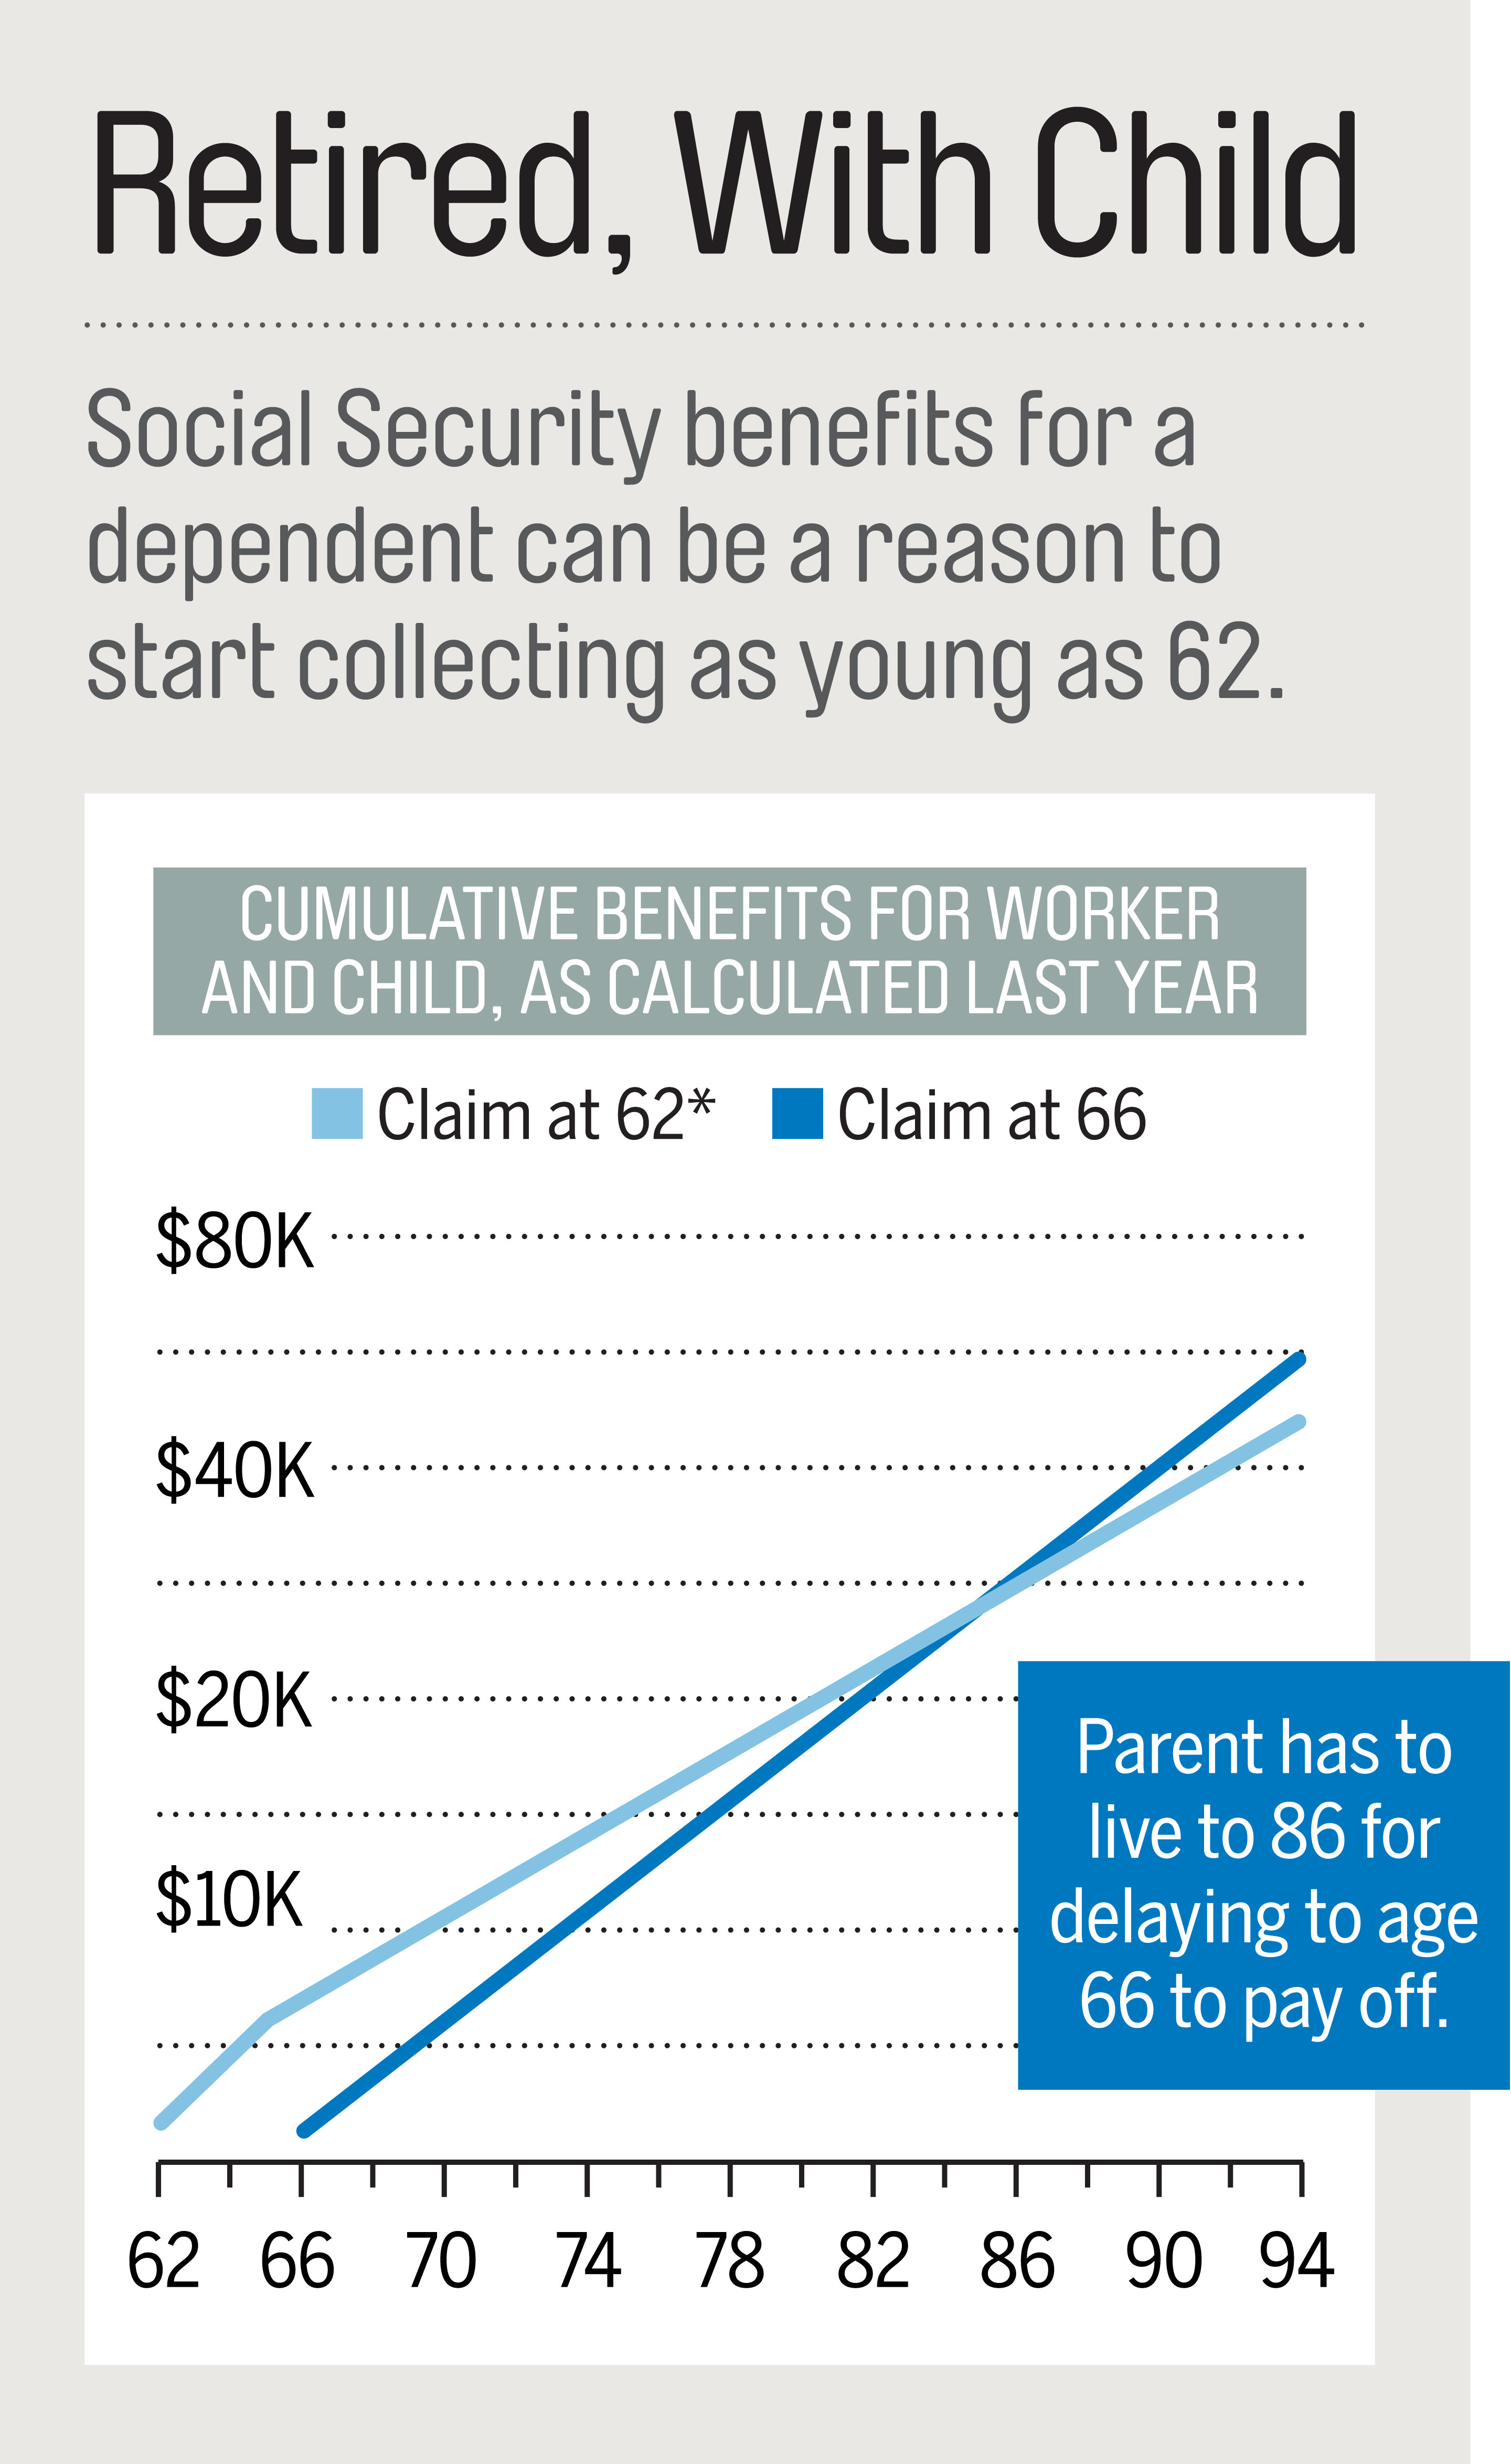 Notes: Assumes child is 14 when the parent is 62; parent’s benefit if taken at full retirement age (66) is $2,000. *Monthly benefits reduced due to early filing. Source: William Reichenstein, Social Security Solutions